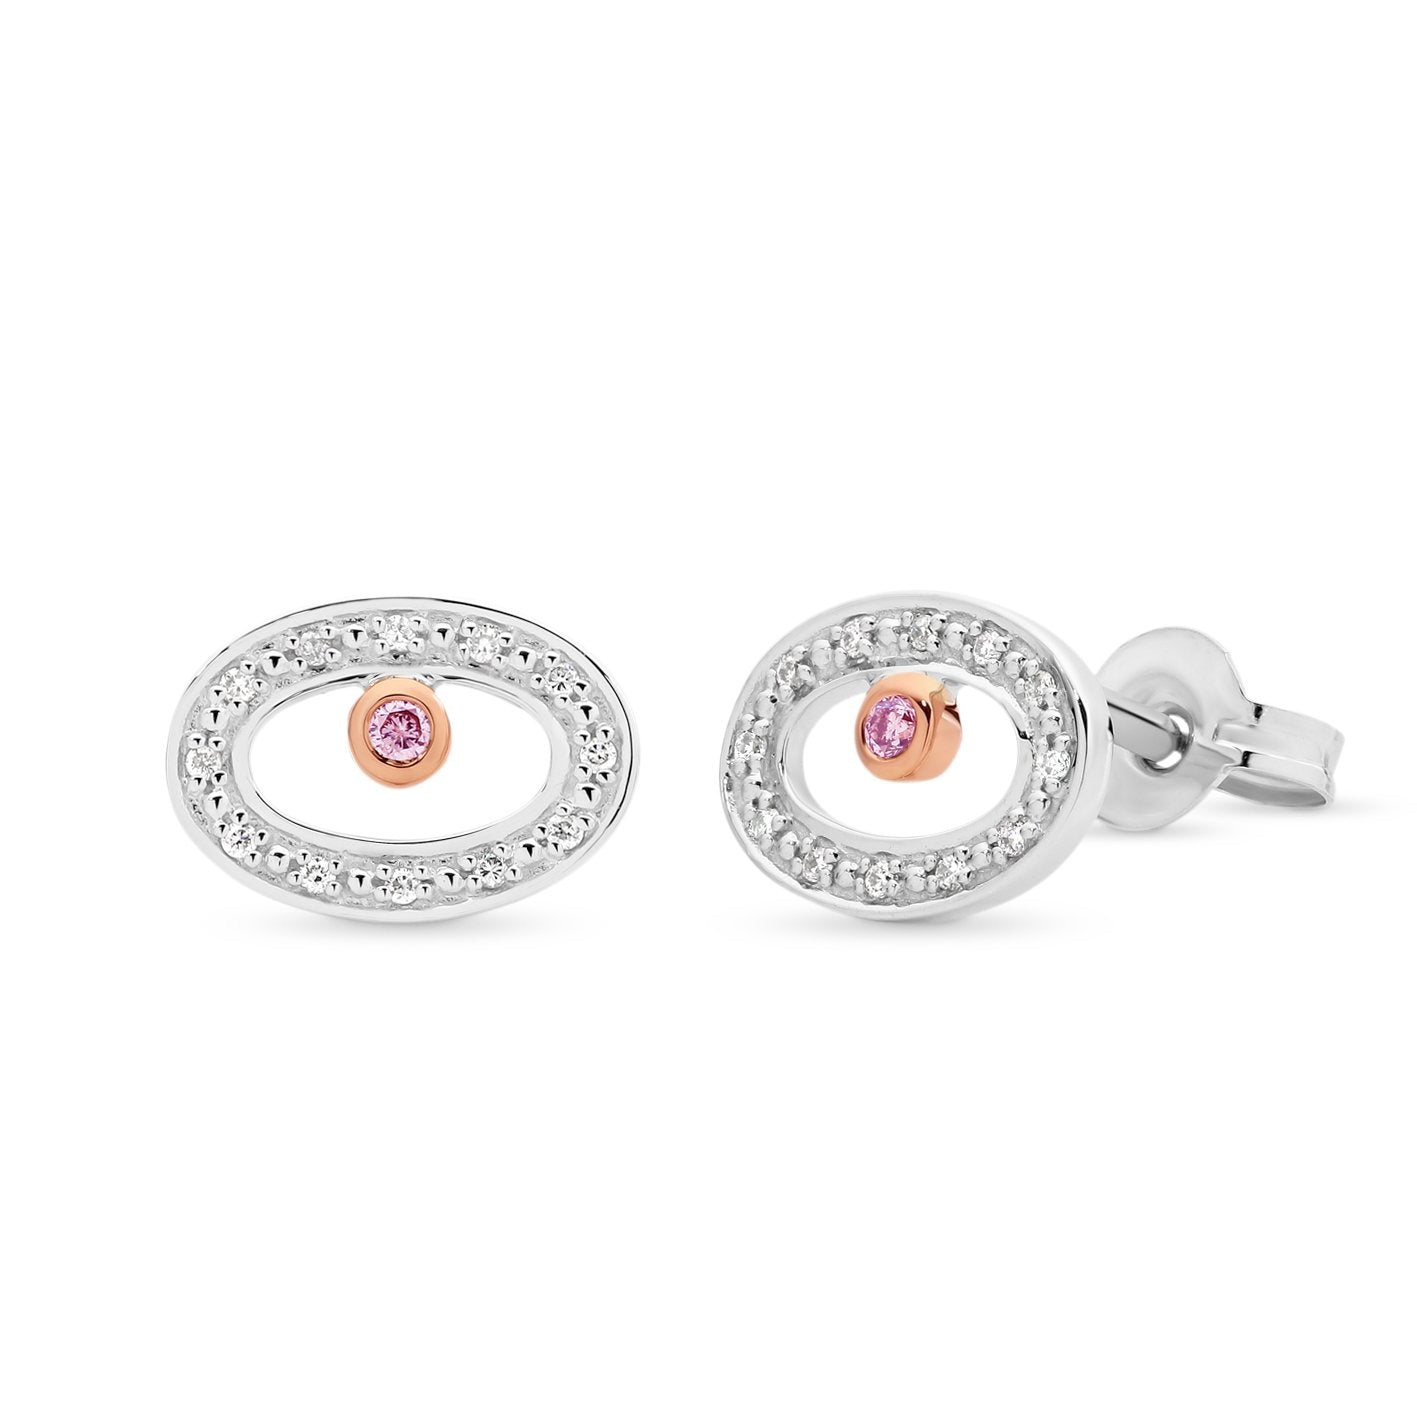 PINK CAVIAR 0.02ct Pink Diamond Earrings in 9ct White Gold